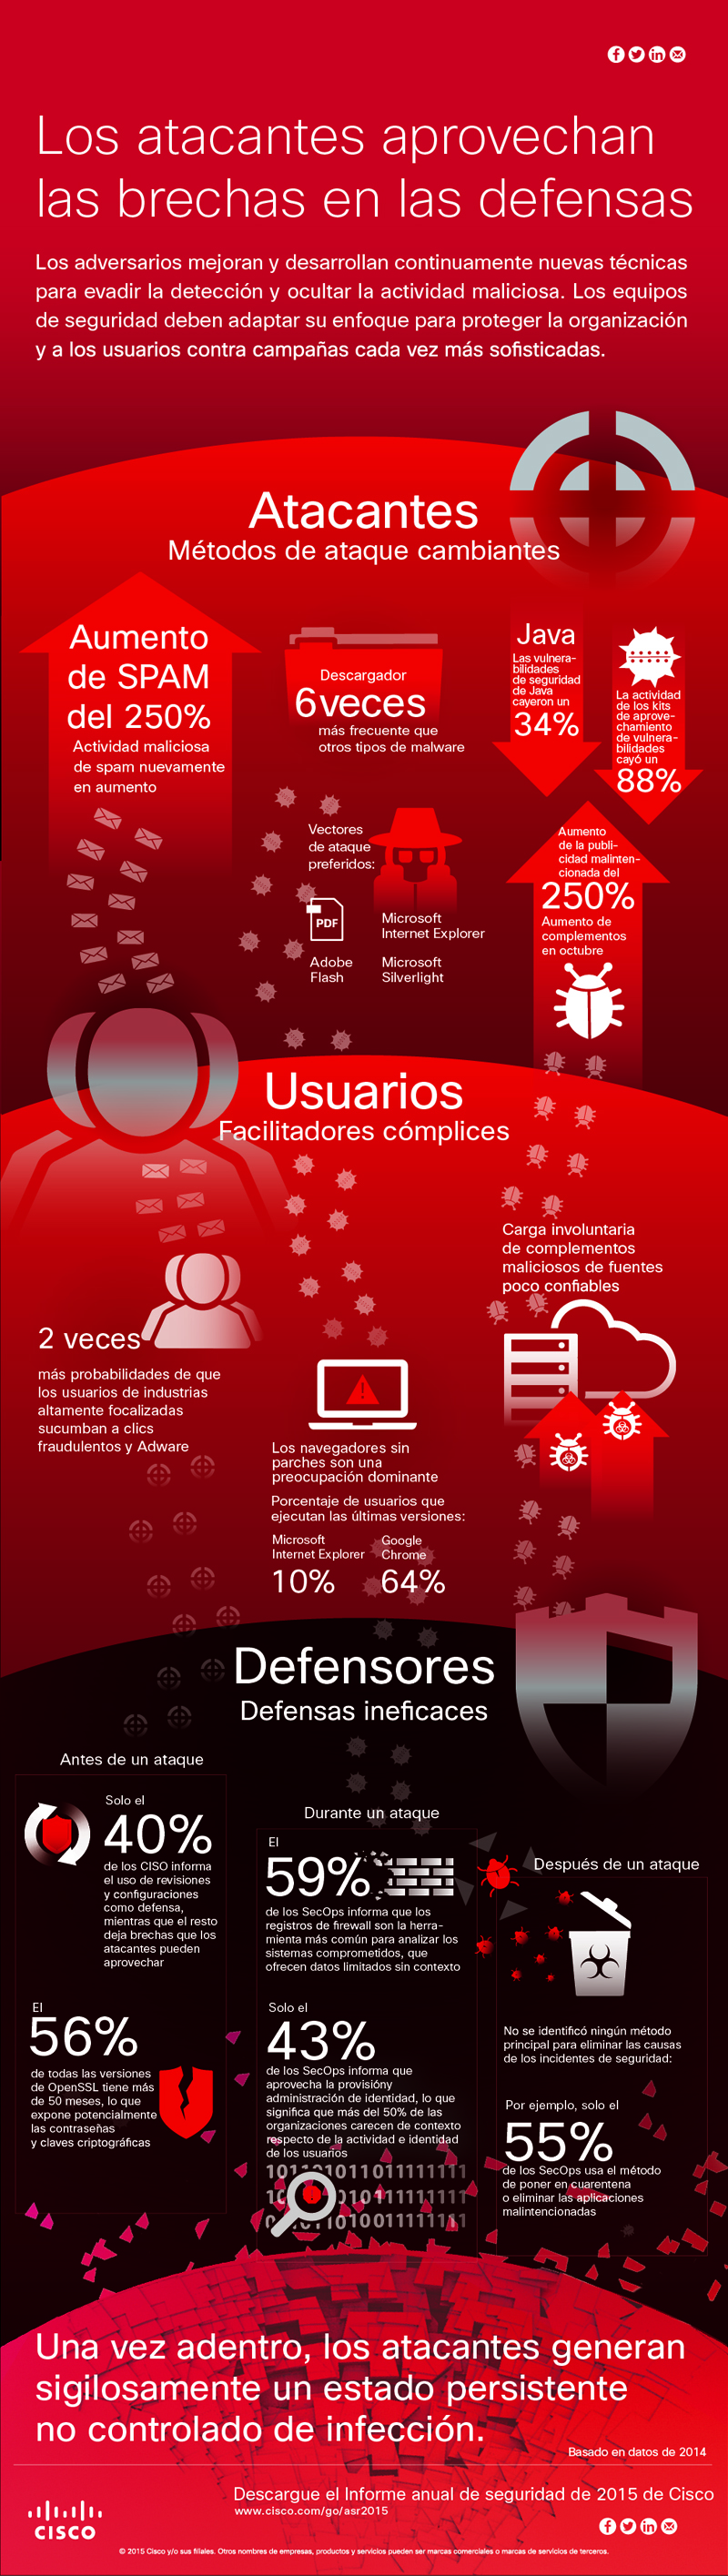 Cisco_ASR_Overview_Infographic_011615-3